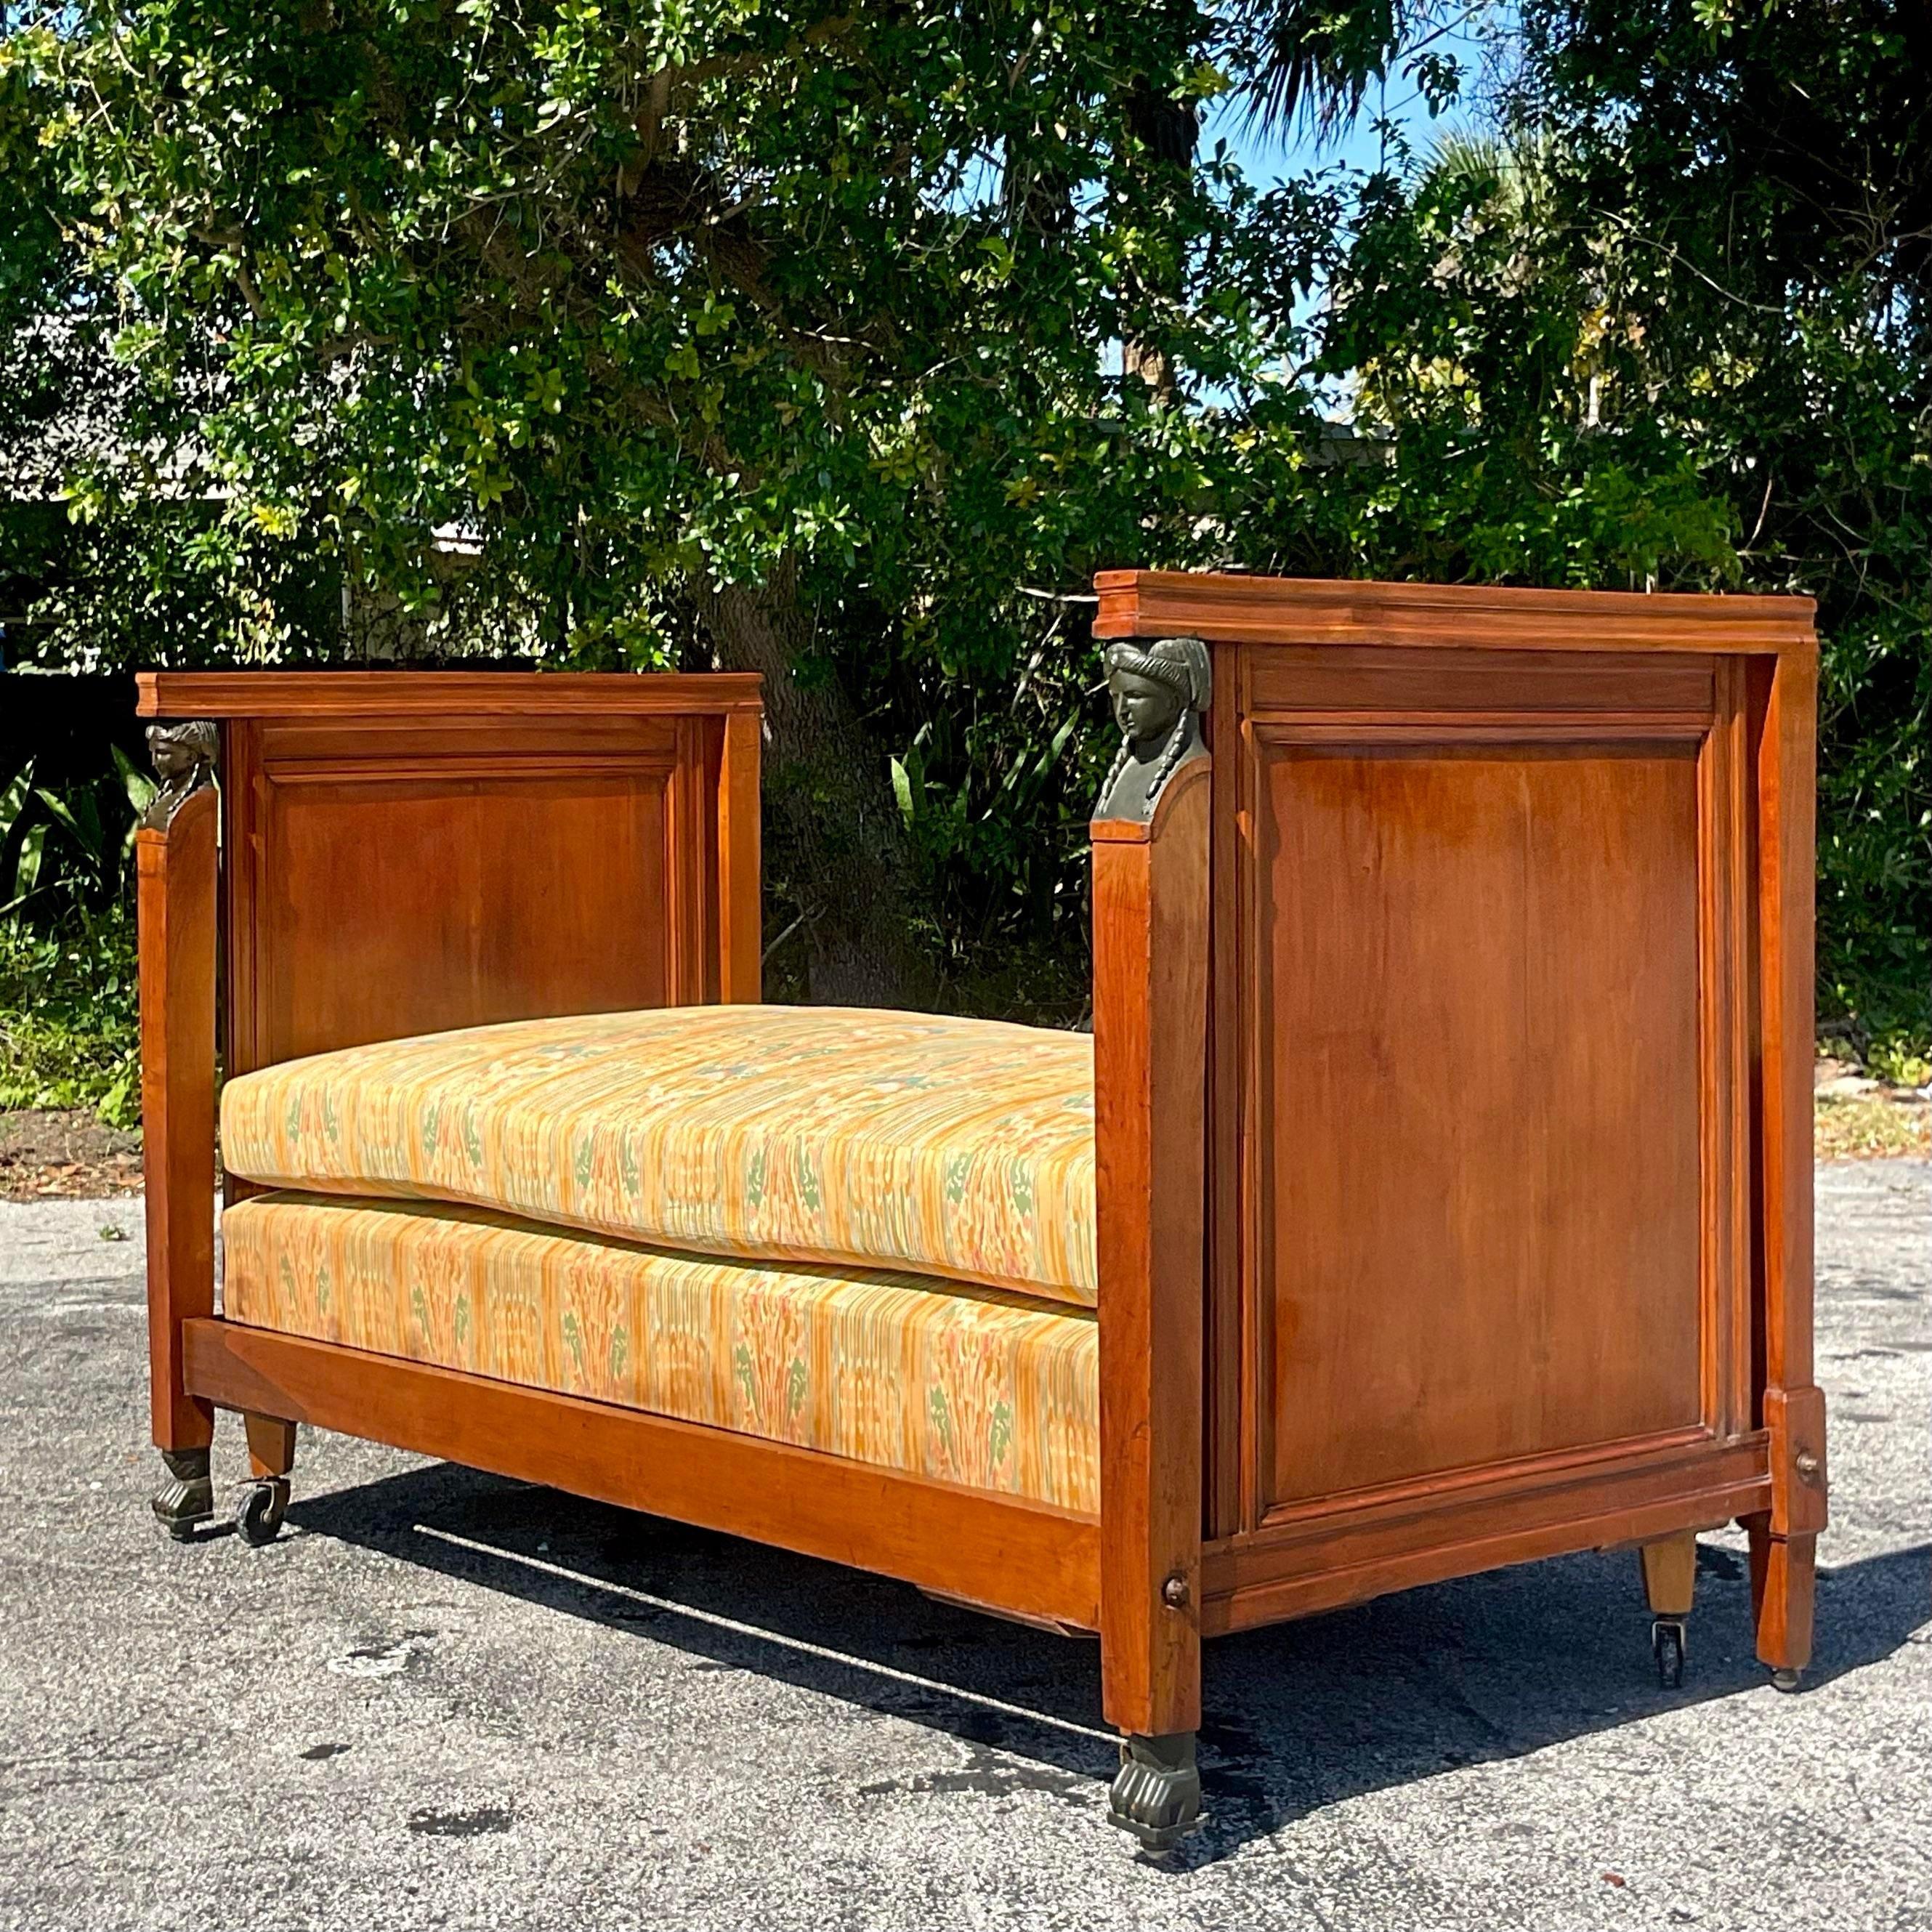 Experience vintage boho charm and European elegance with our 19th Century Austrian Walnut Biedermeier Trundle Bed. Imported with care and crafted to perfection, this exquisite piece seamlessly blends timeless design with bohemian flair. Embrace its